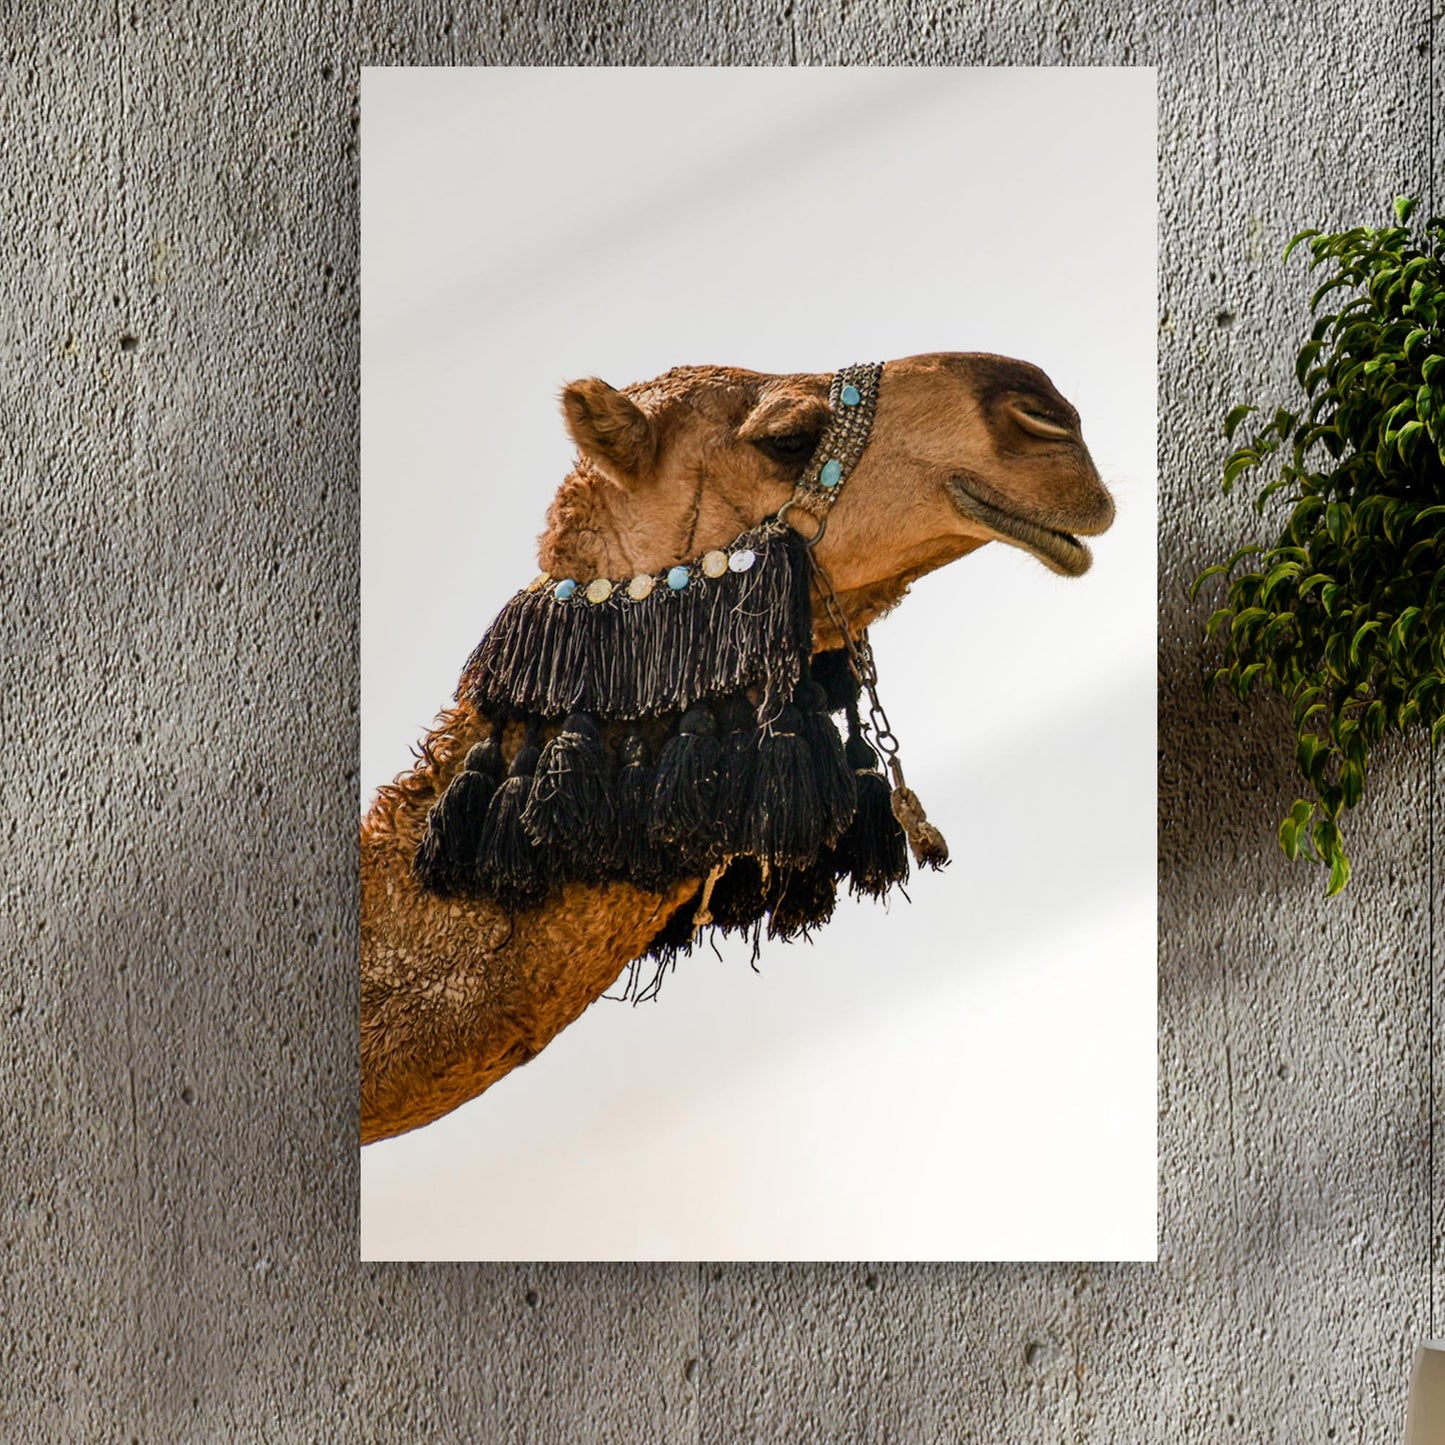 Boho Desert Camel Portrait Canvas Wall Art - Image by Tailored Canvases